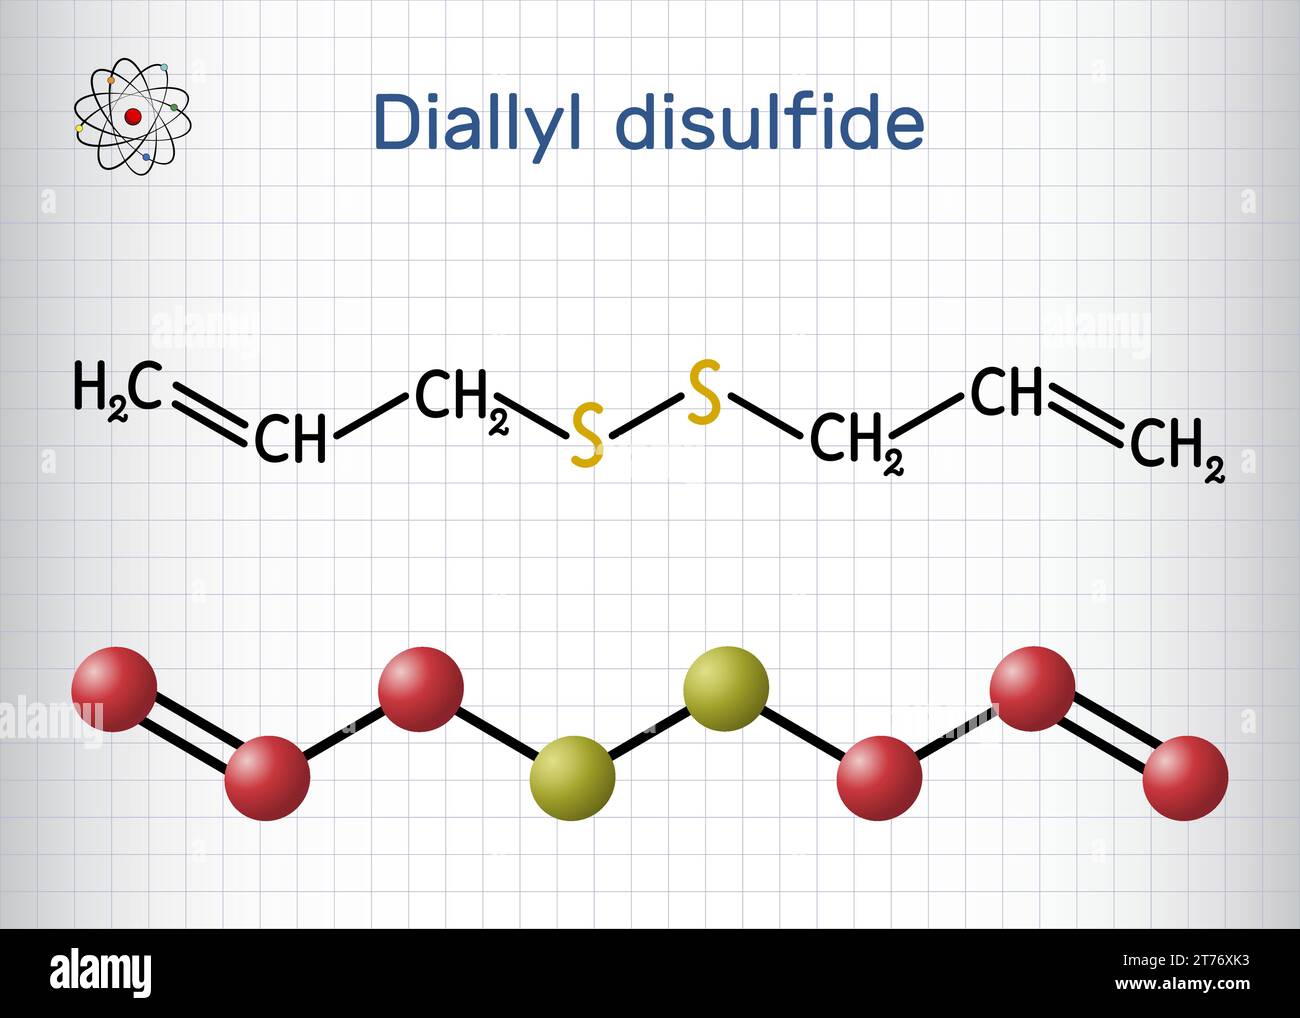 Diallyl disulfide, DADS molecule. Structural chemical formula, molecule model. Sheet of paper in a cage. Stock Vector